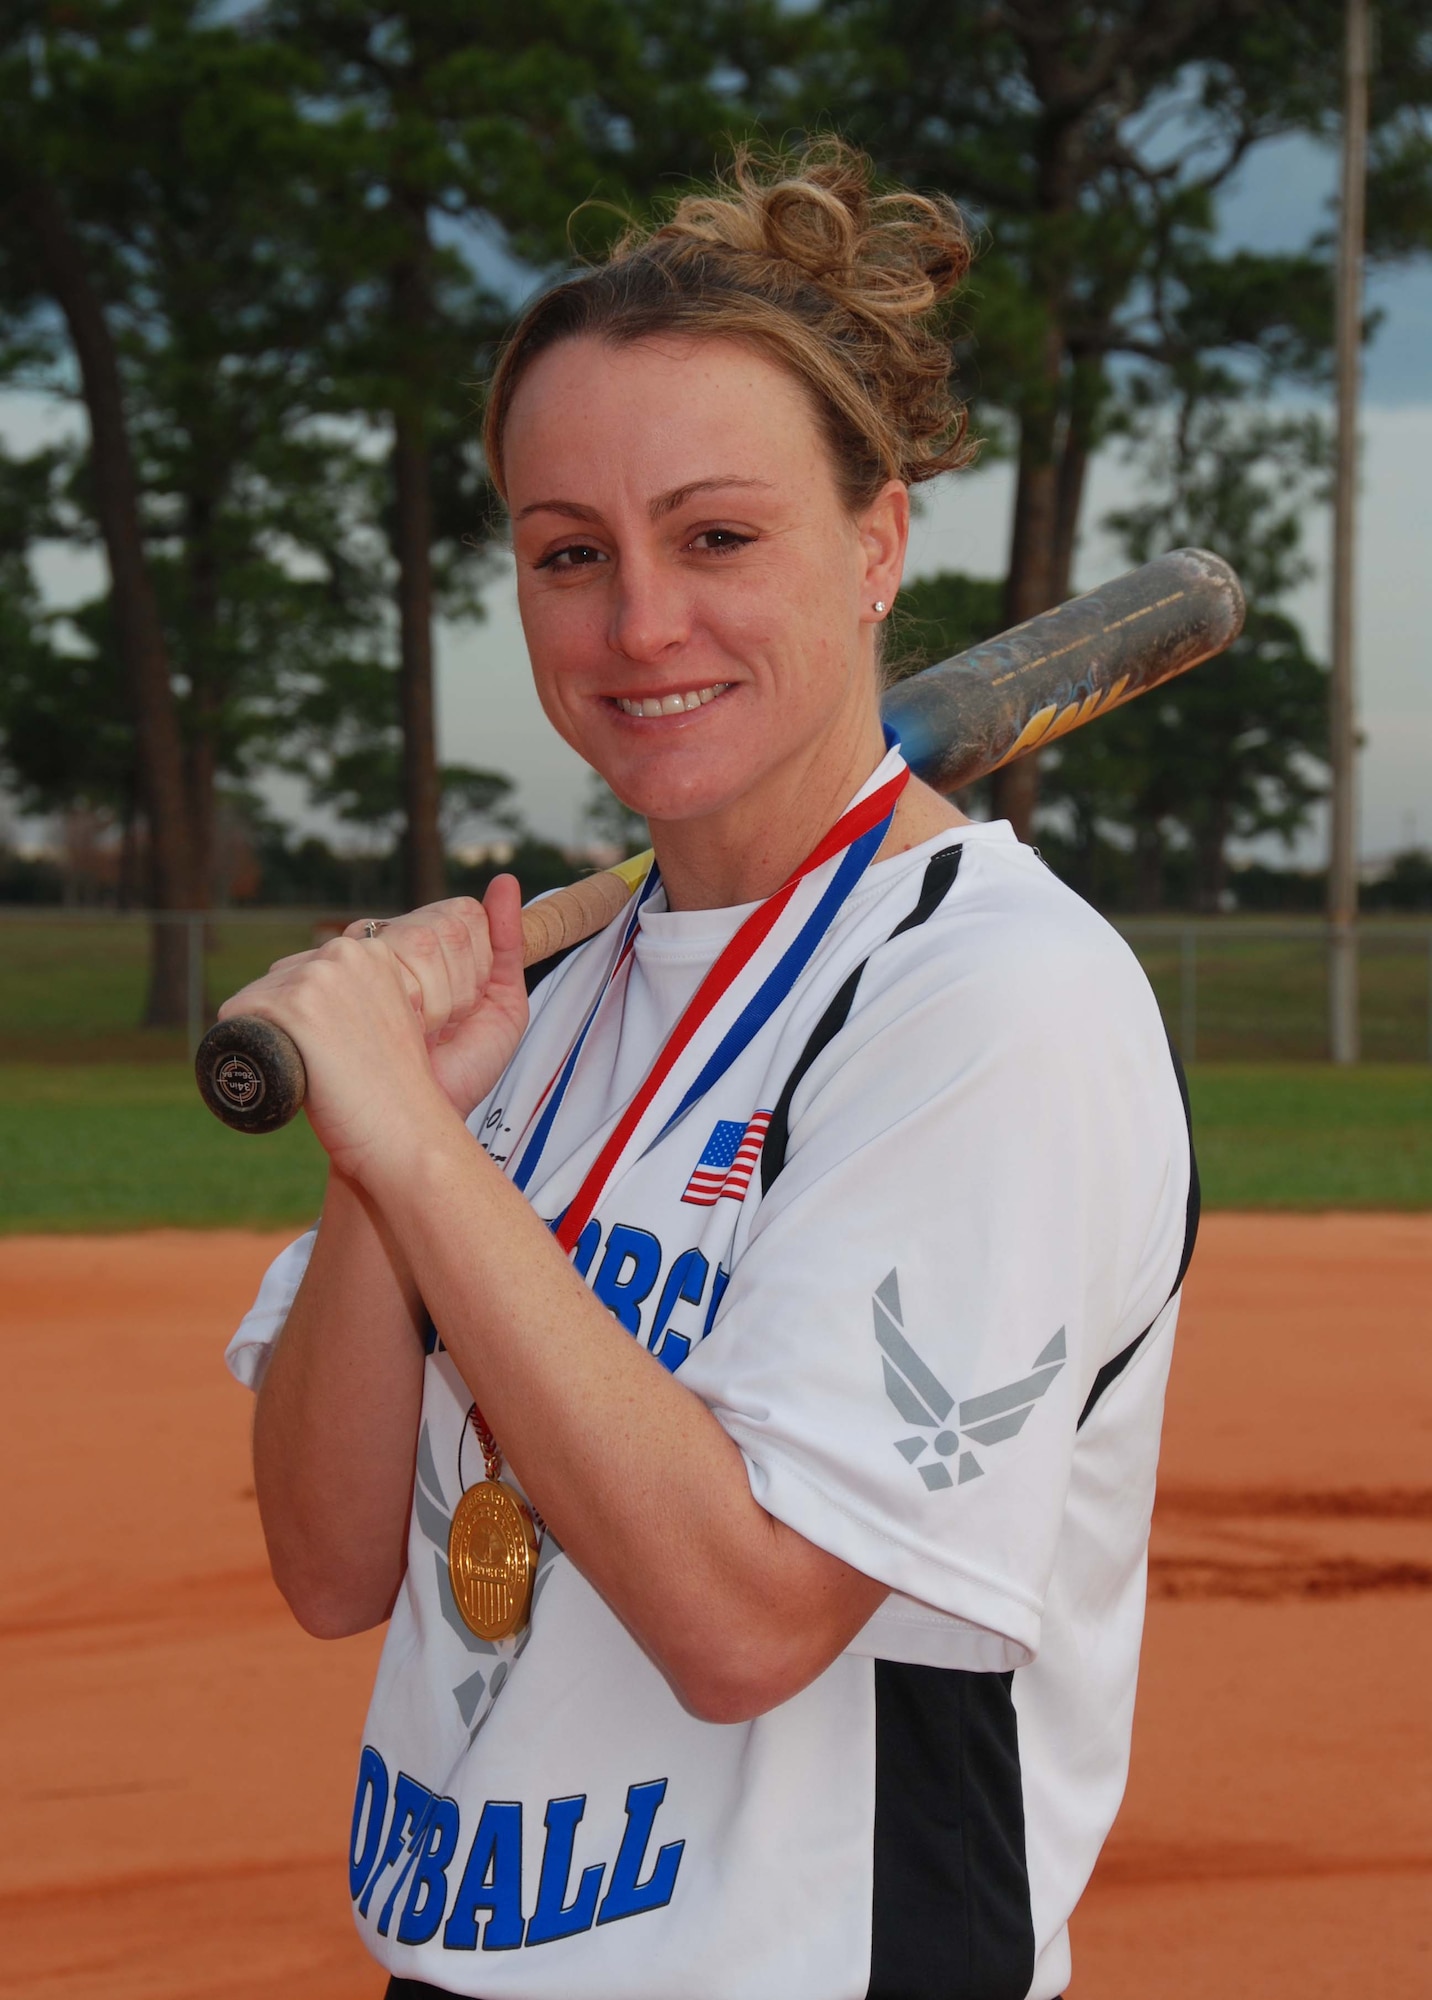 “My father drove me to do my best, and I’ve always tried to follow his advice,” said Master Sgt. Karrie Warren, the 2009 U.S. Air Force Female Athlete of the Year, seen here in her Air Force softball uniform.  (U.S. Air Force Photo by Maj. Steve Burke)